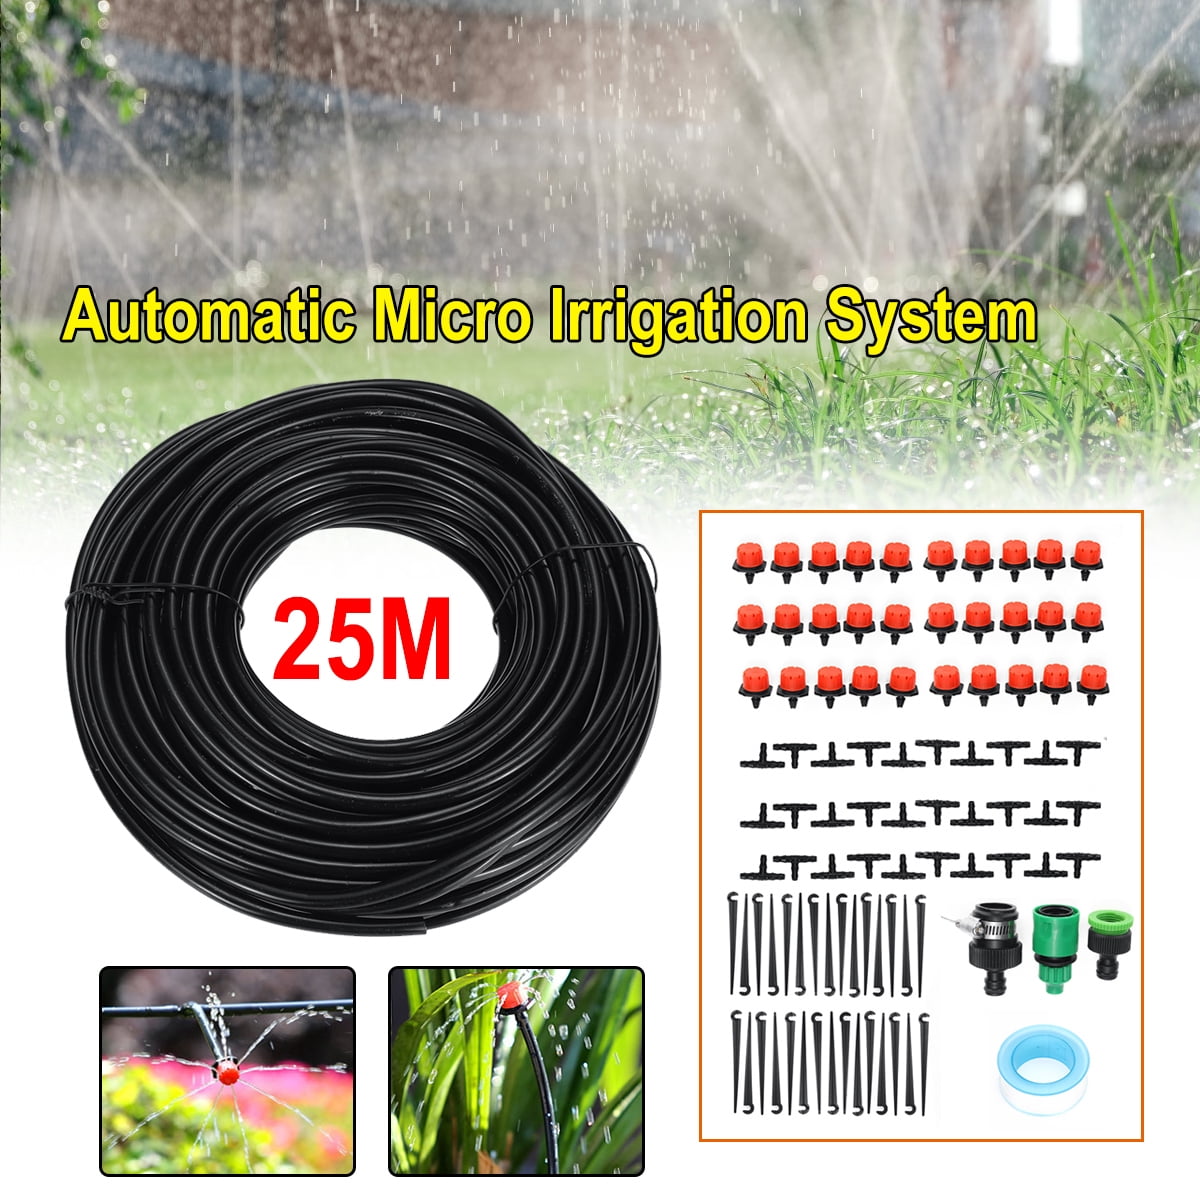 25M Water Irrigation Kit Micro Drip Watering System Automatic Plant Garden Tool 